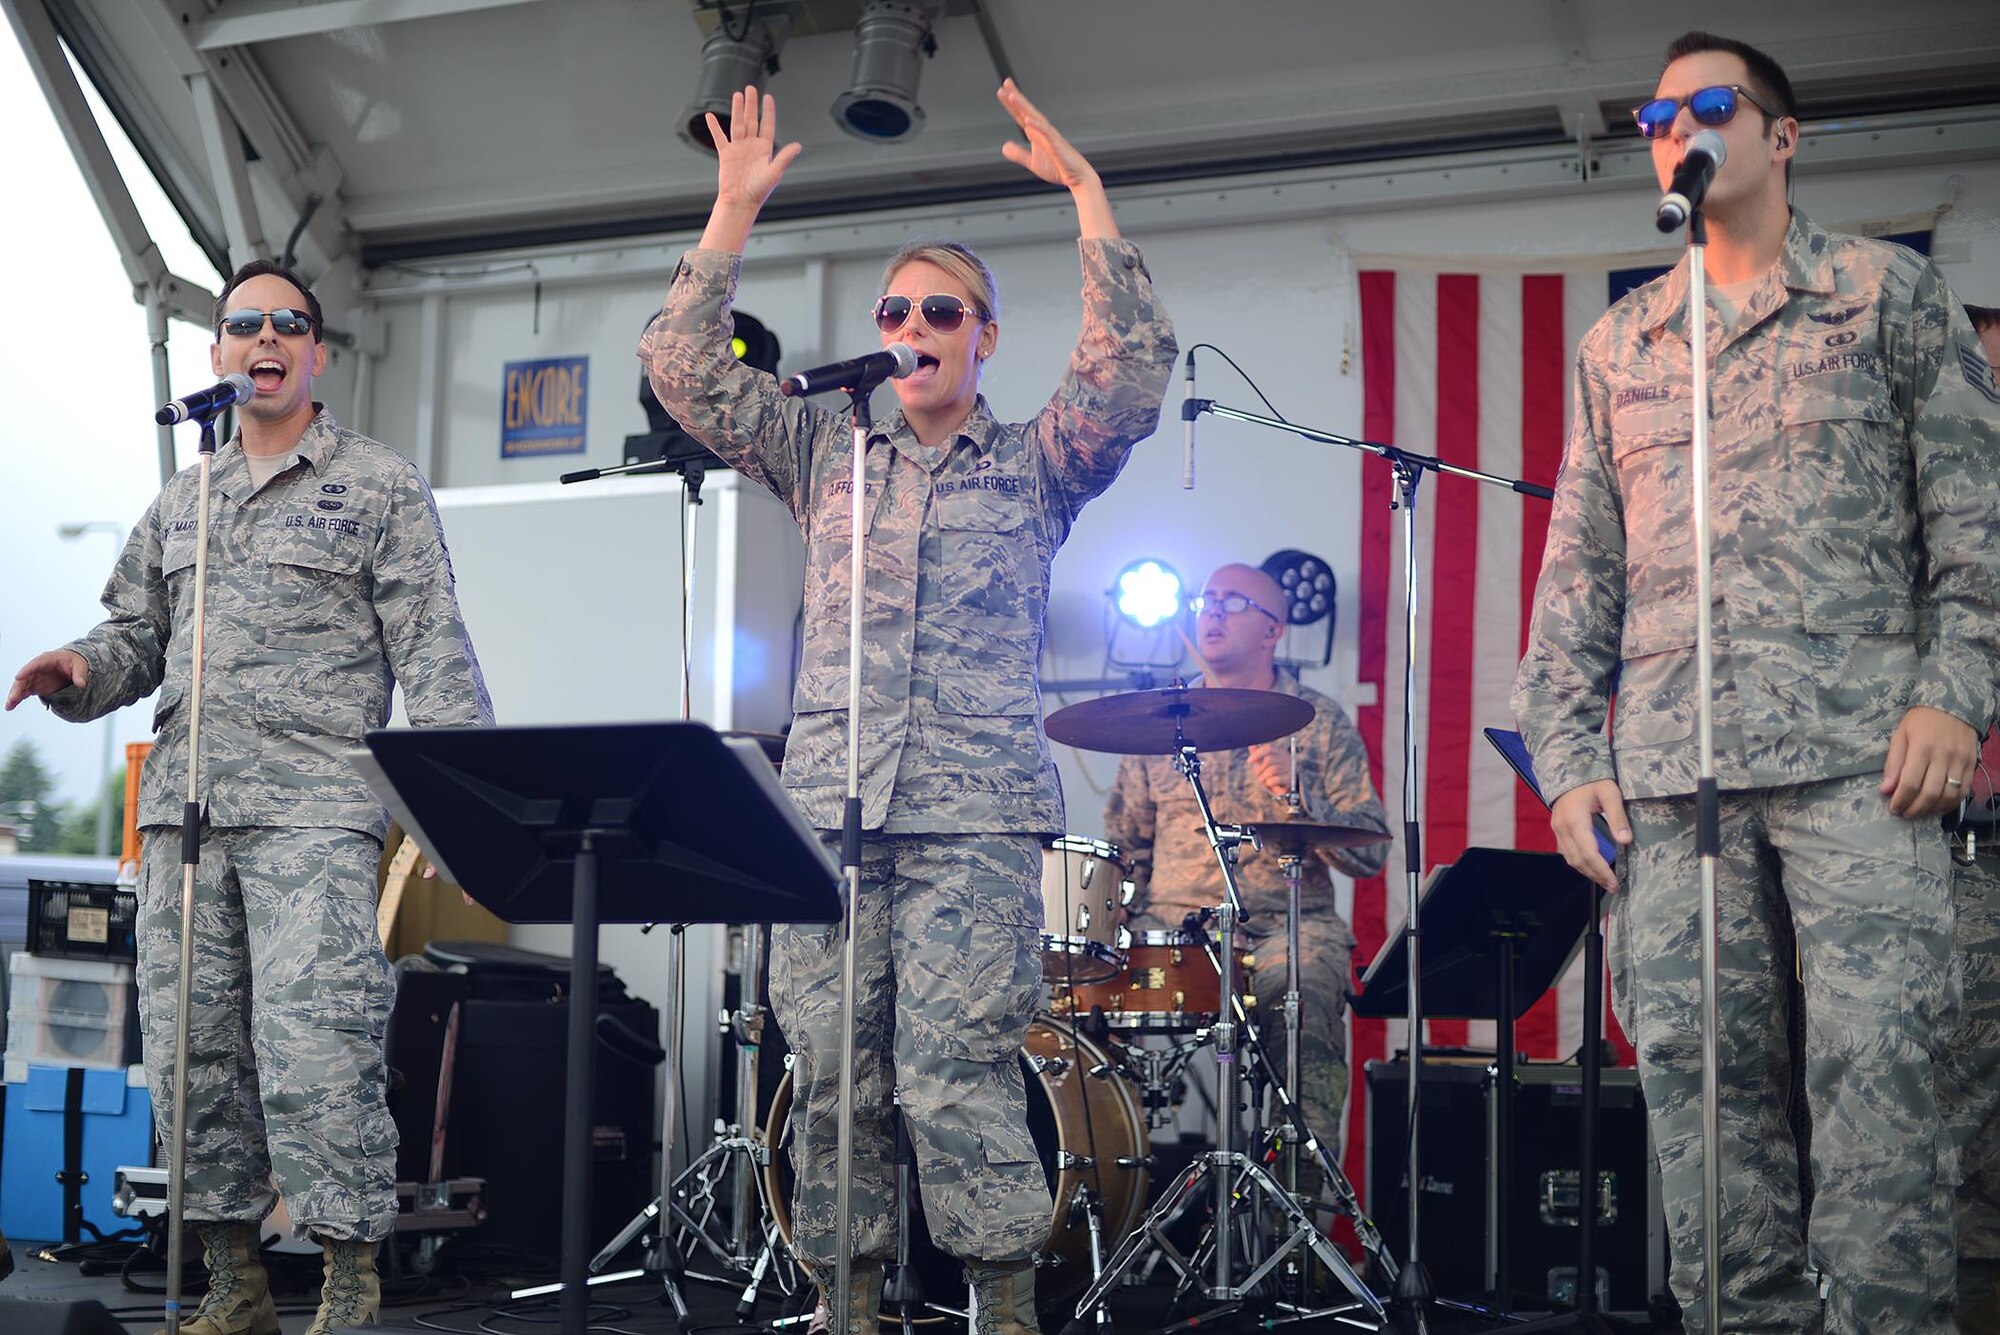 The Band of the Pacific-Hawaii music group, 'Hana Hou!', performs during the Celebrate America event at Yokota Air Base, Japan, July 2, 2015. The group played both English and Japanese songs, honoring the host nation's contributions toward this Independence Day event. (U.S. Air Force photo by Airman 1st Class David C. Danford/Released)